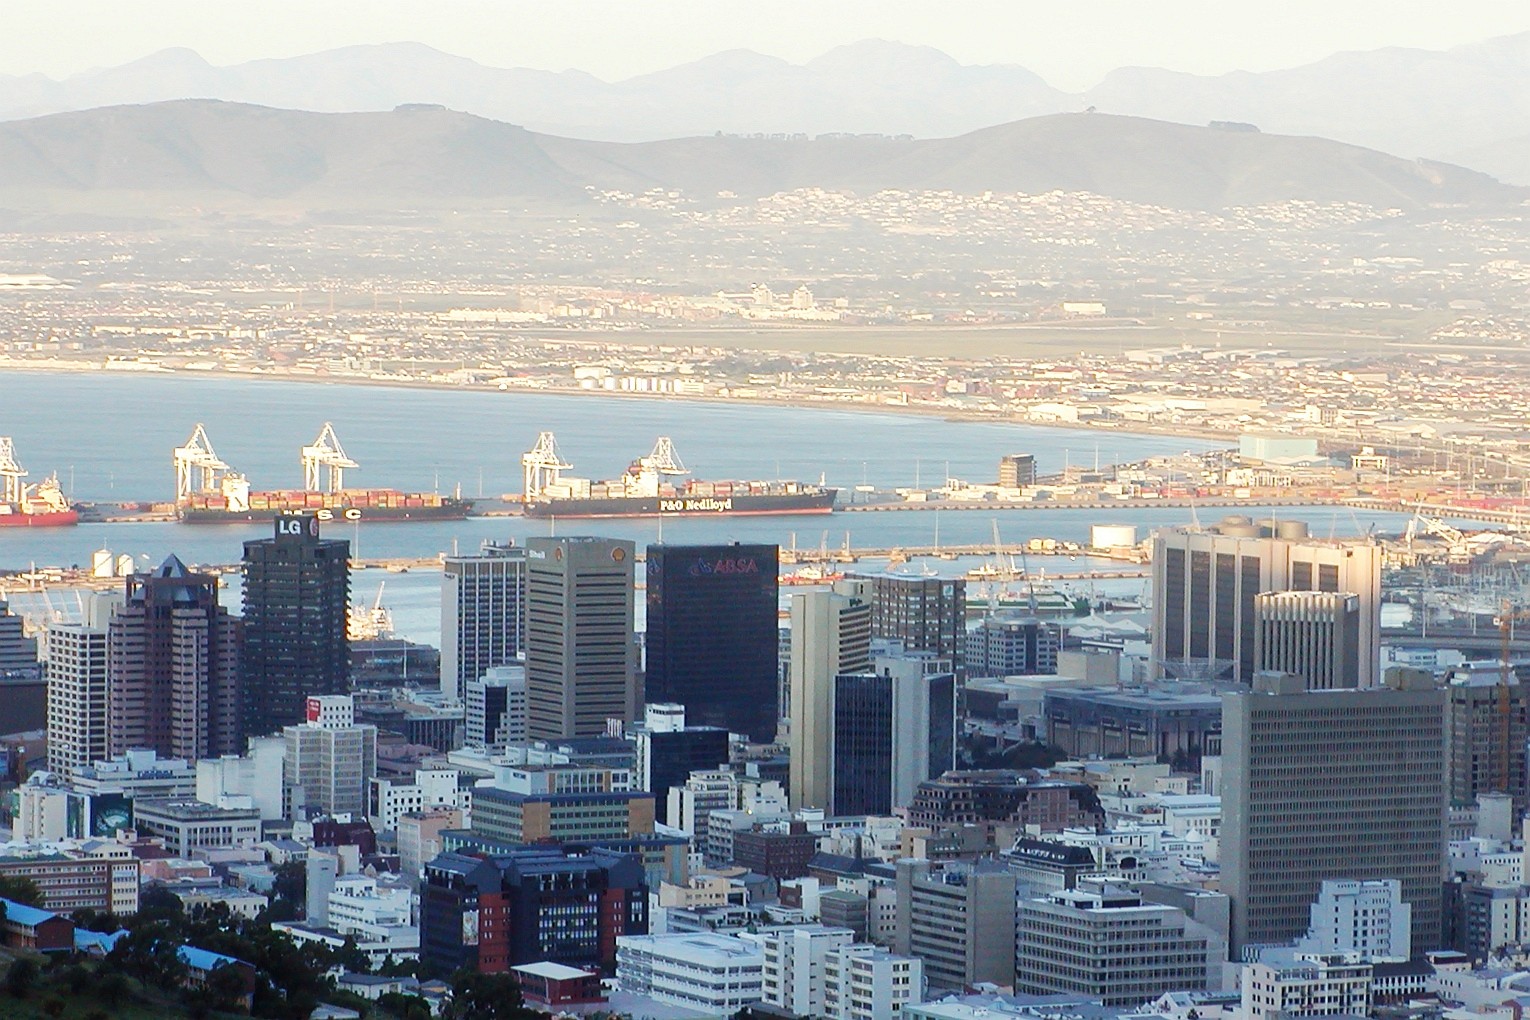 Cape Town  |  International CBD and Table Bay